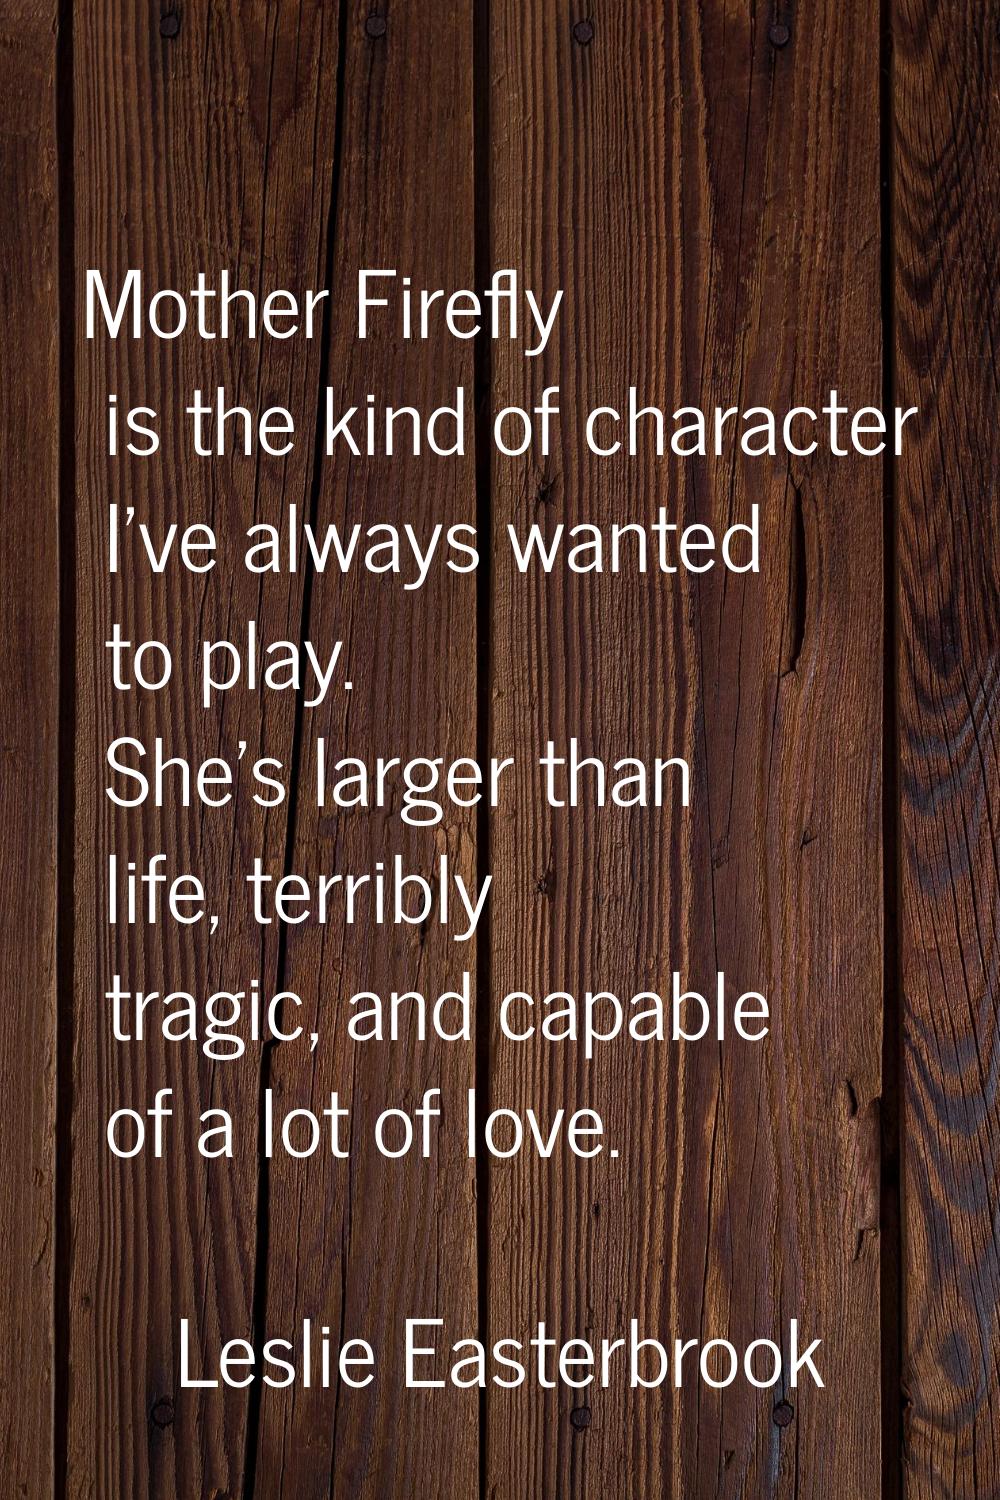 Mother Firefly is the kind of character I've always wanted to play. She's larger than life, terribl